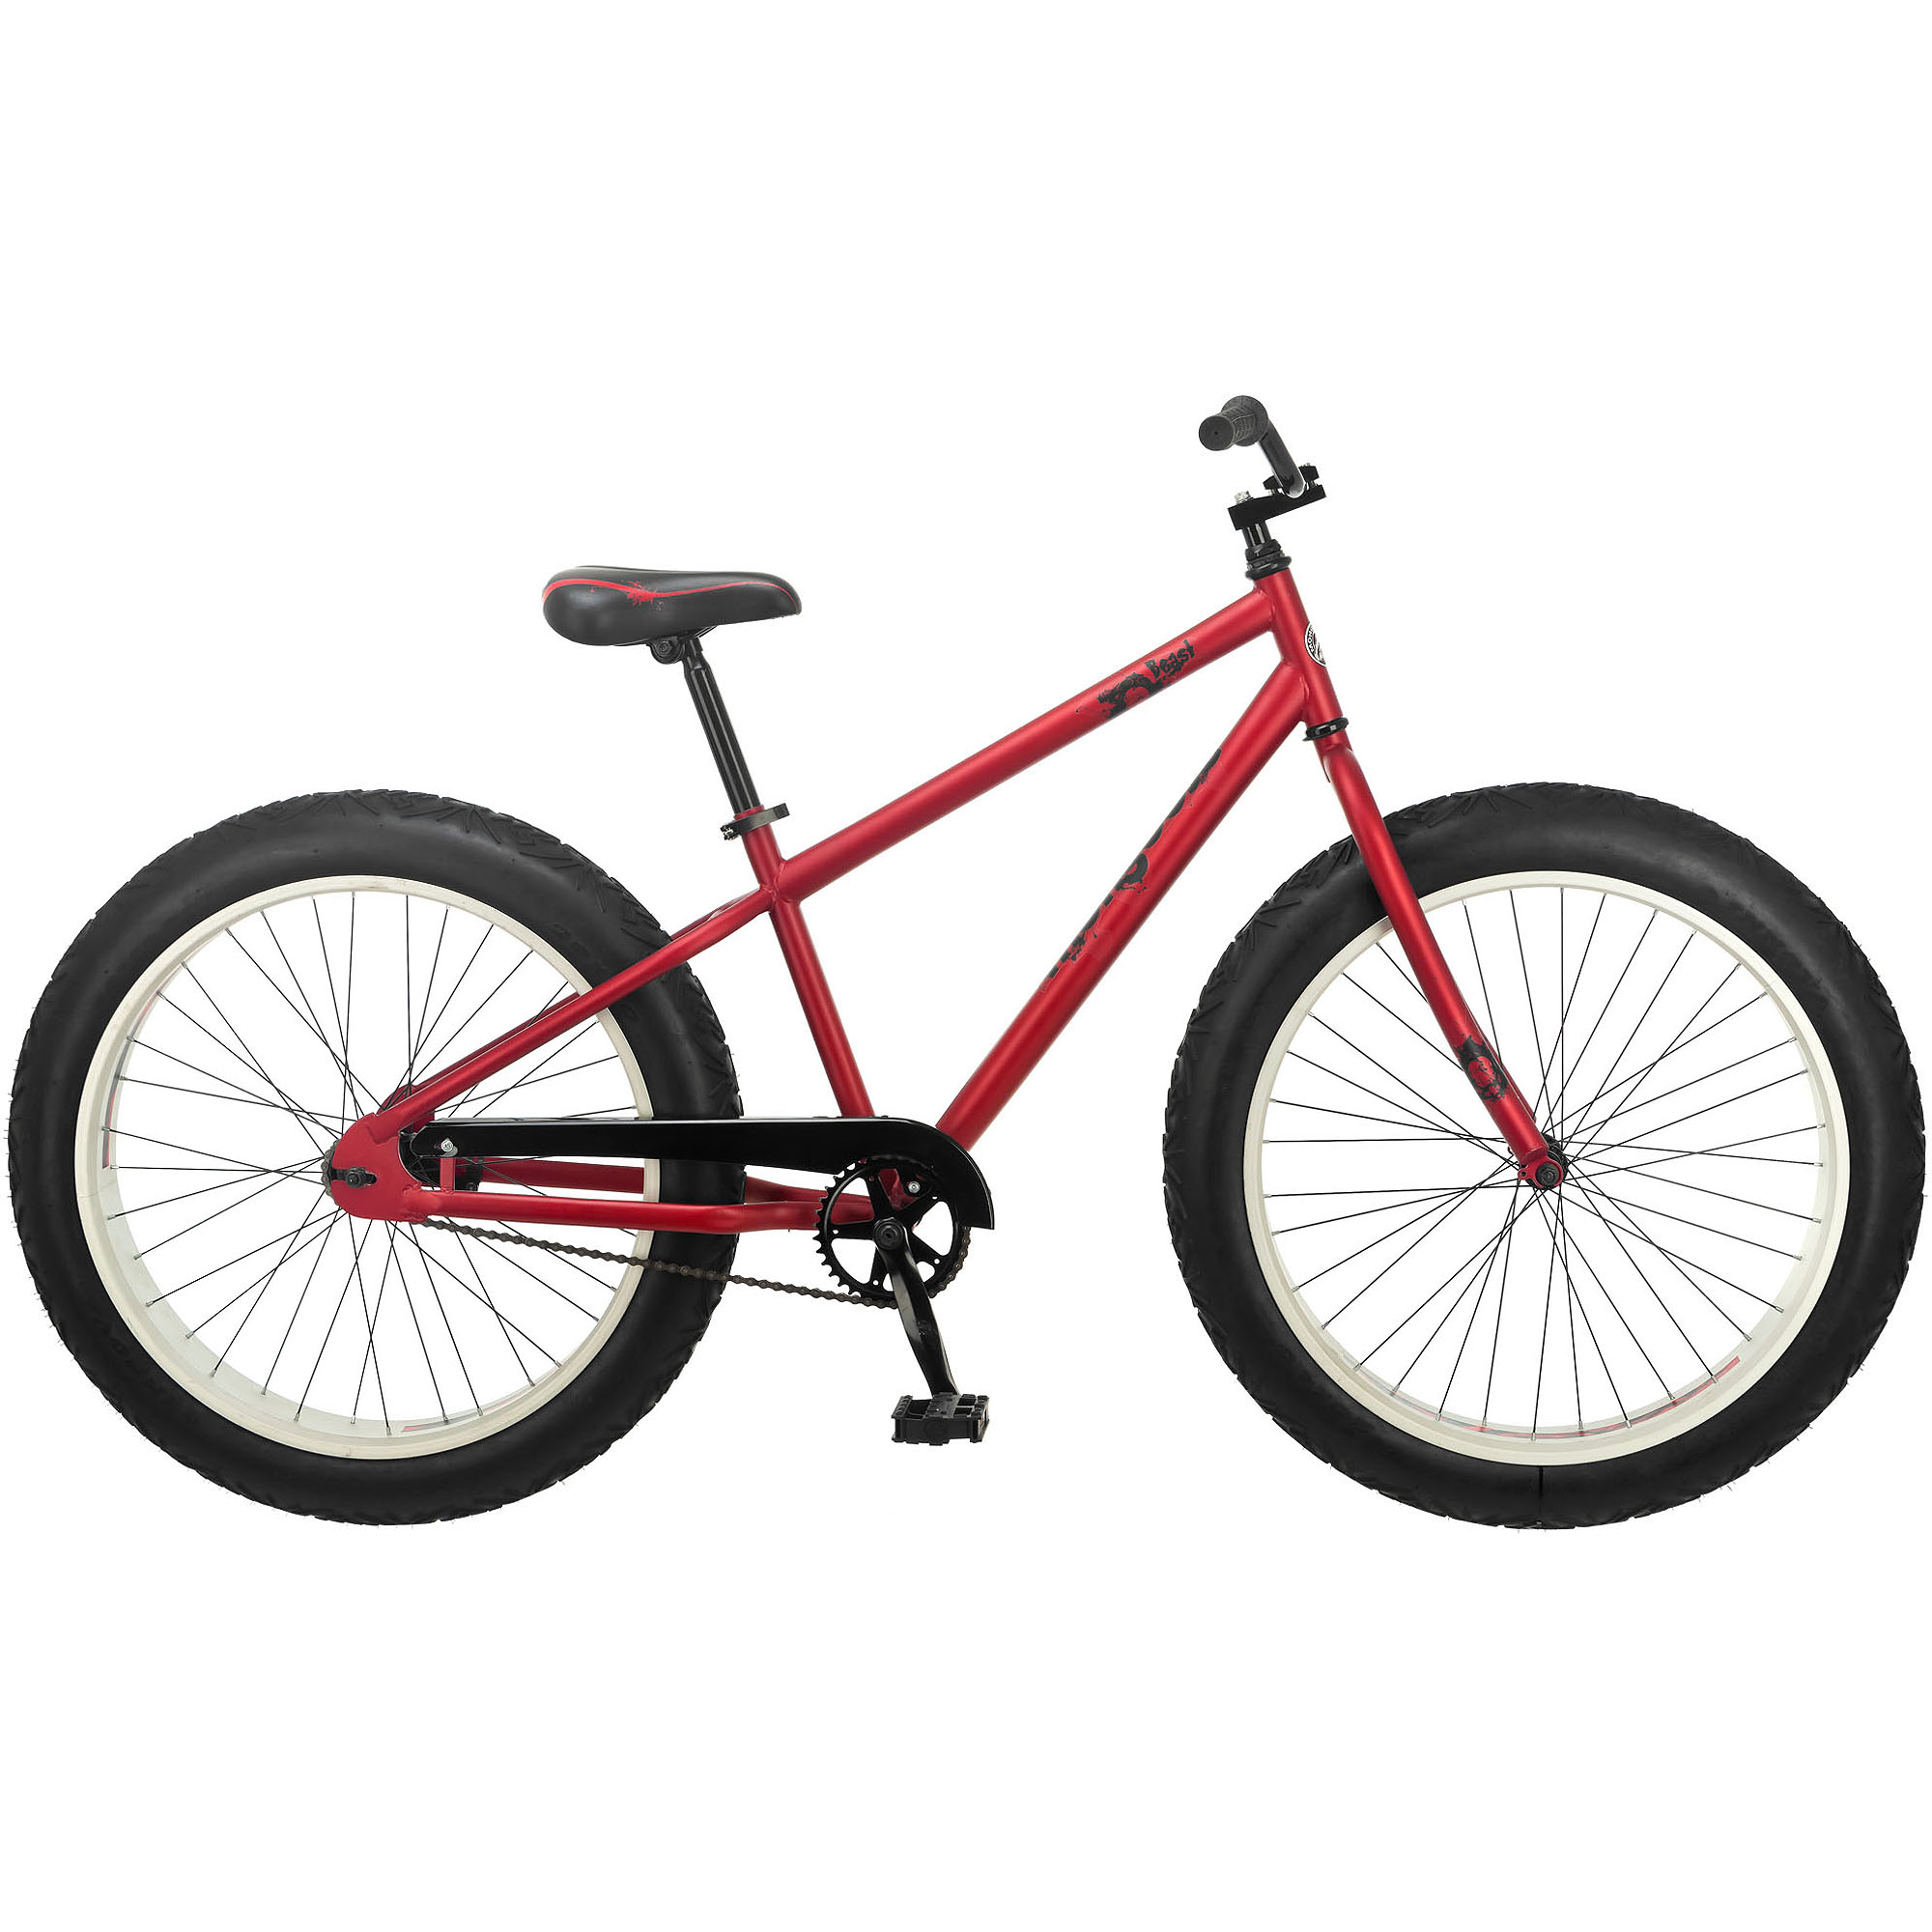 26" Mongoose Beast Men's All-Terrain Fat Tire Mountain, Red - image 3 of 5